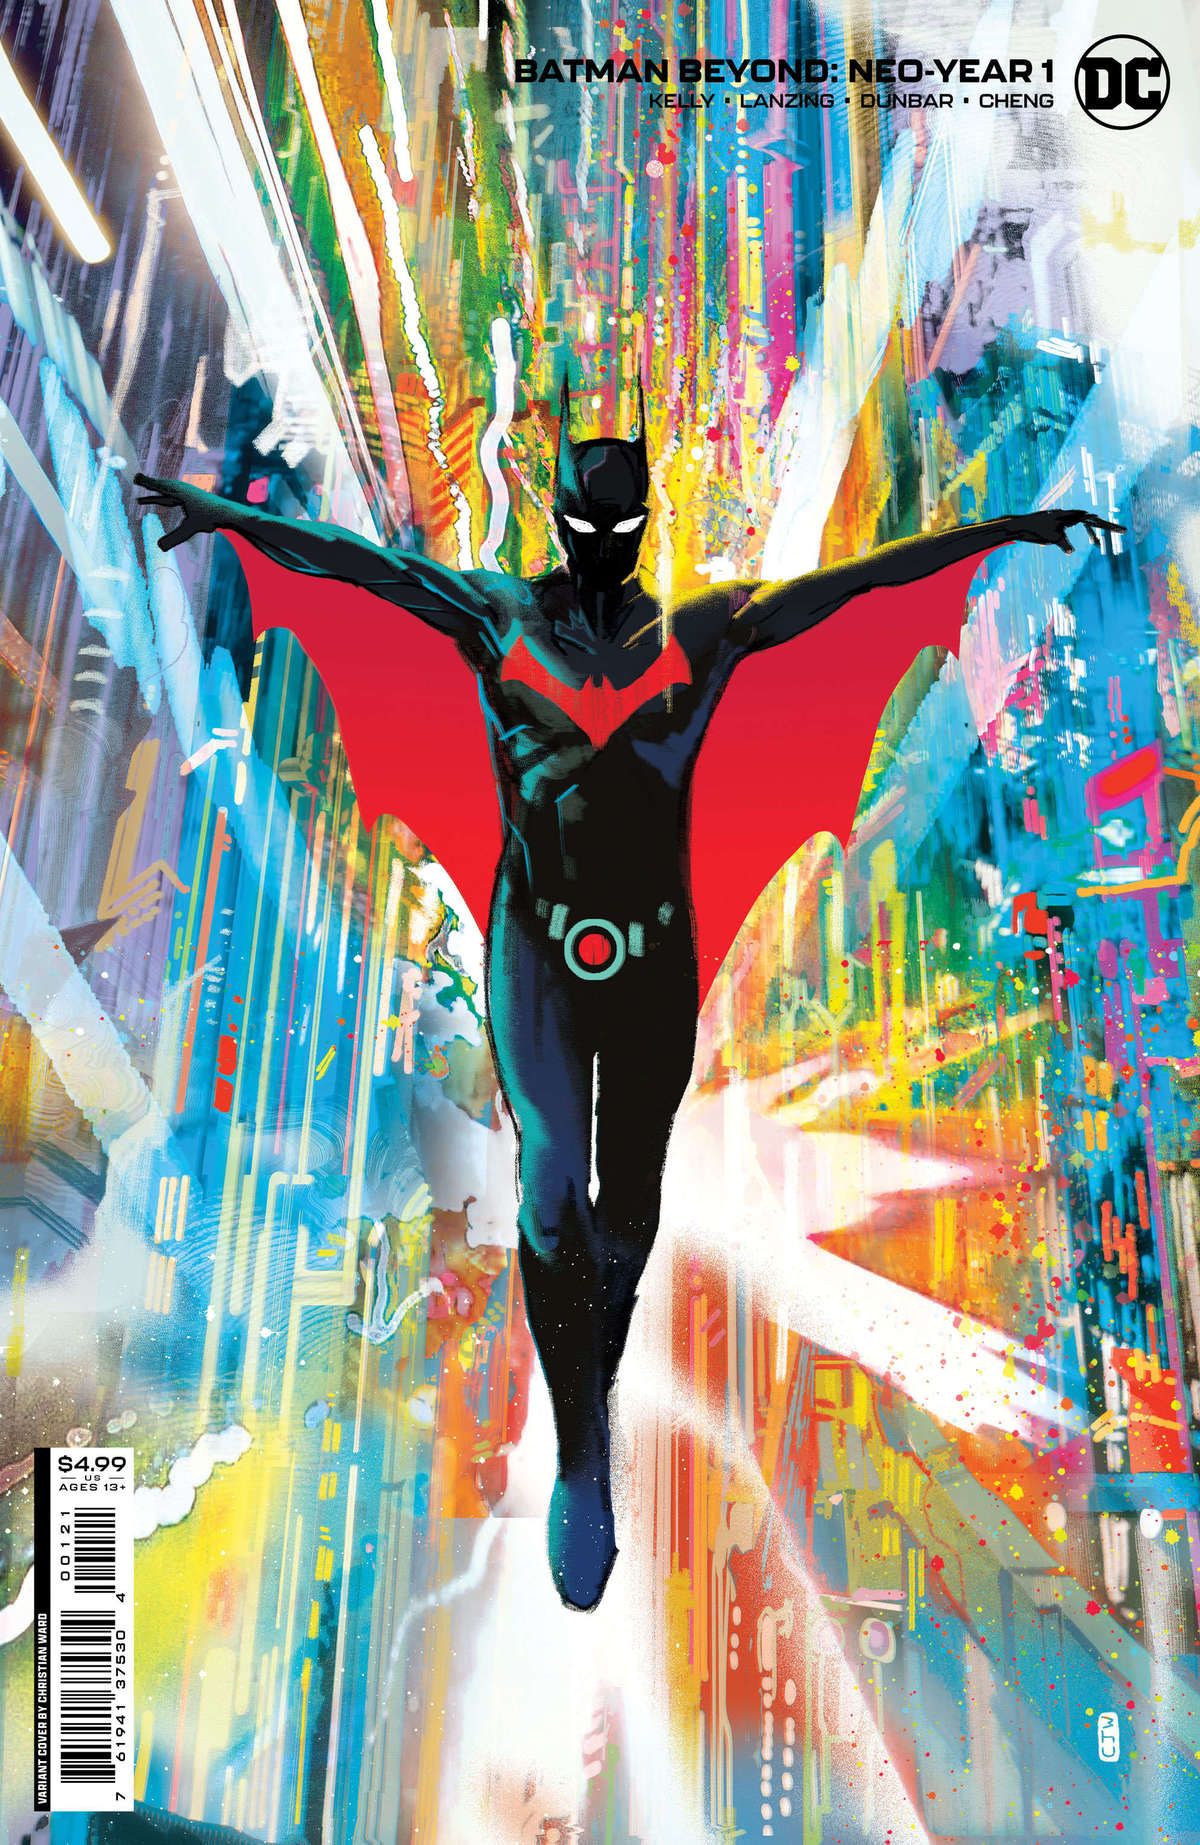 Batman Beyond: Neo-Year variant cover by Christian Ward